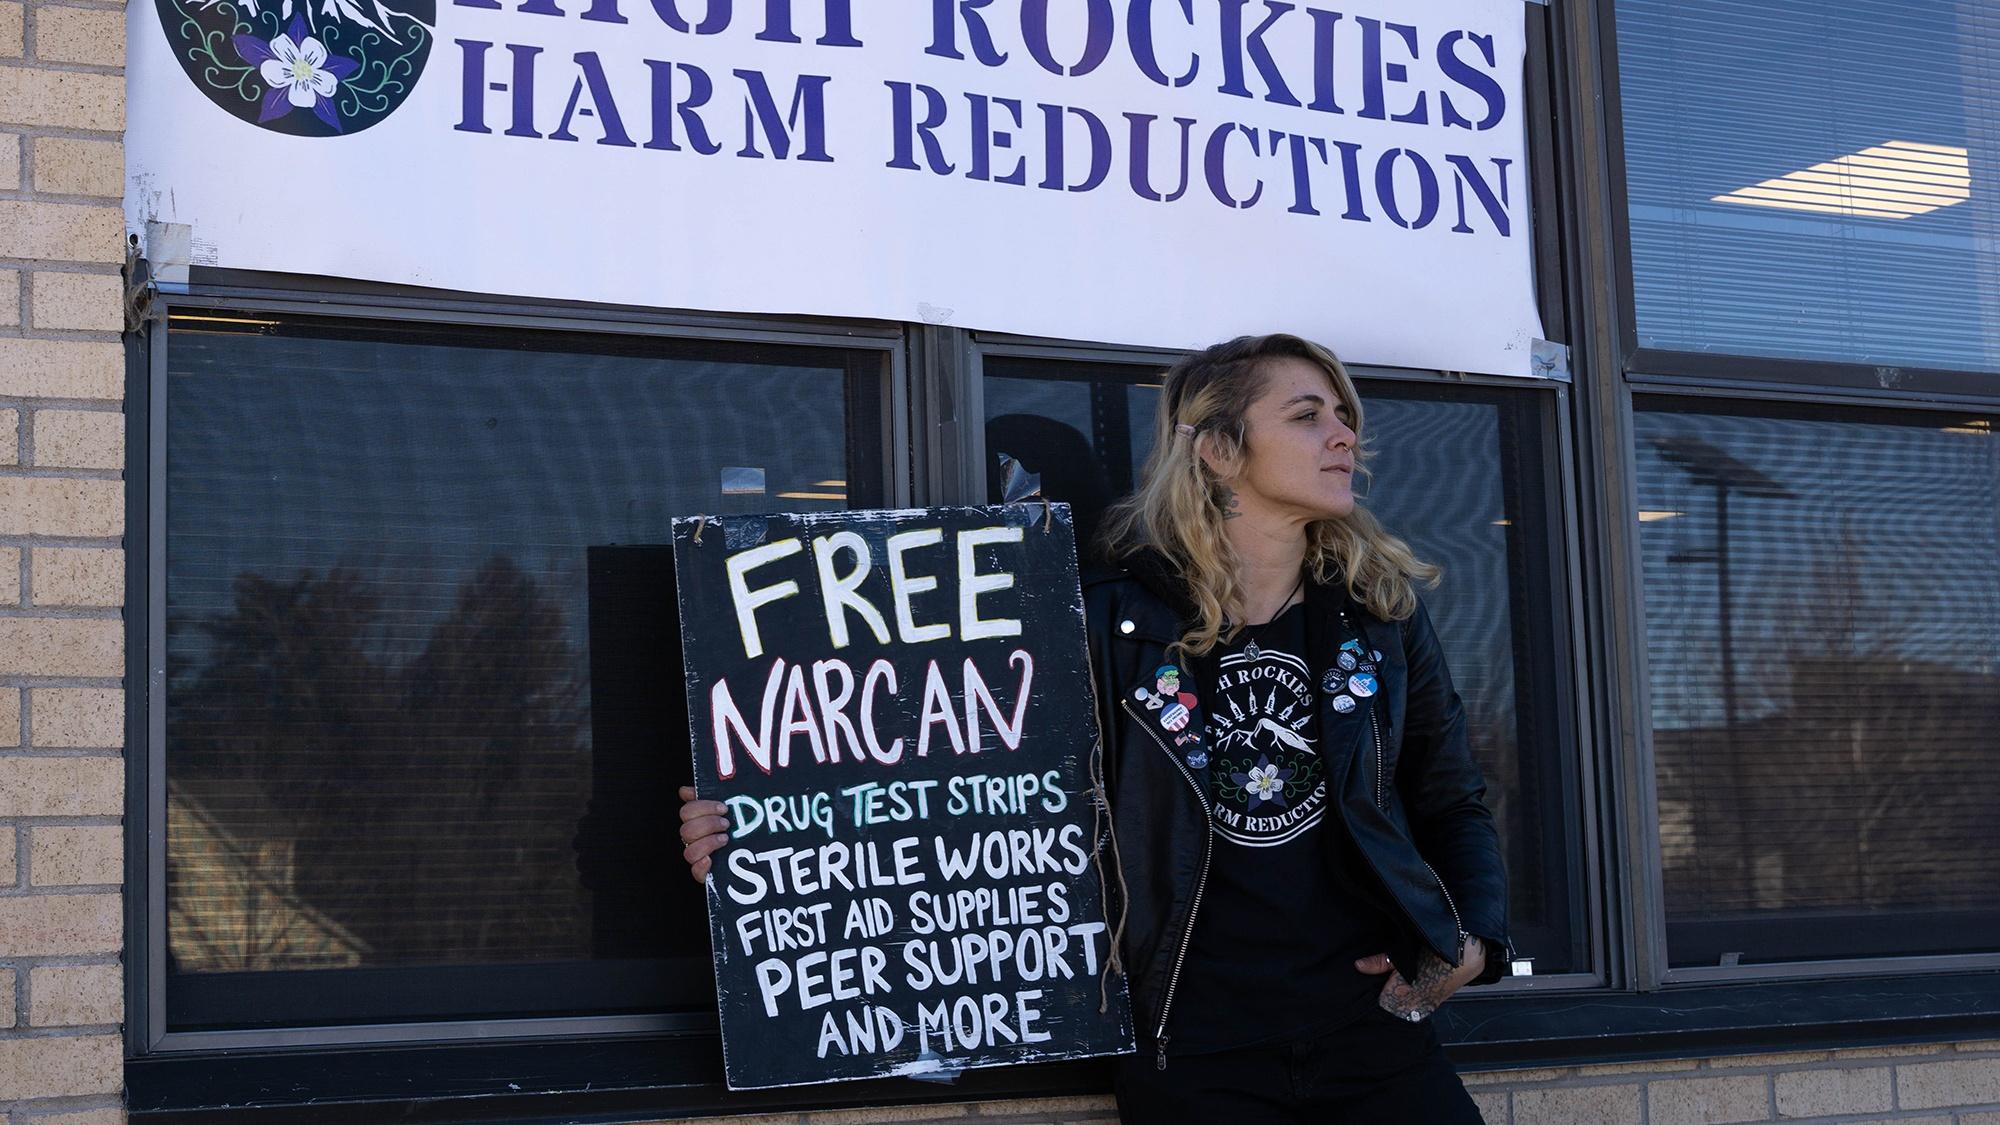 High Rockies Harm Reduction founder Maggie Seldeen is living proof that, whether officials want to acknowledge it or not, the Roaring Fork Valley is not immune to the substance abuse issues sweeping the nation